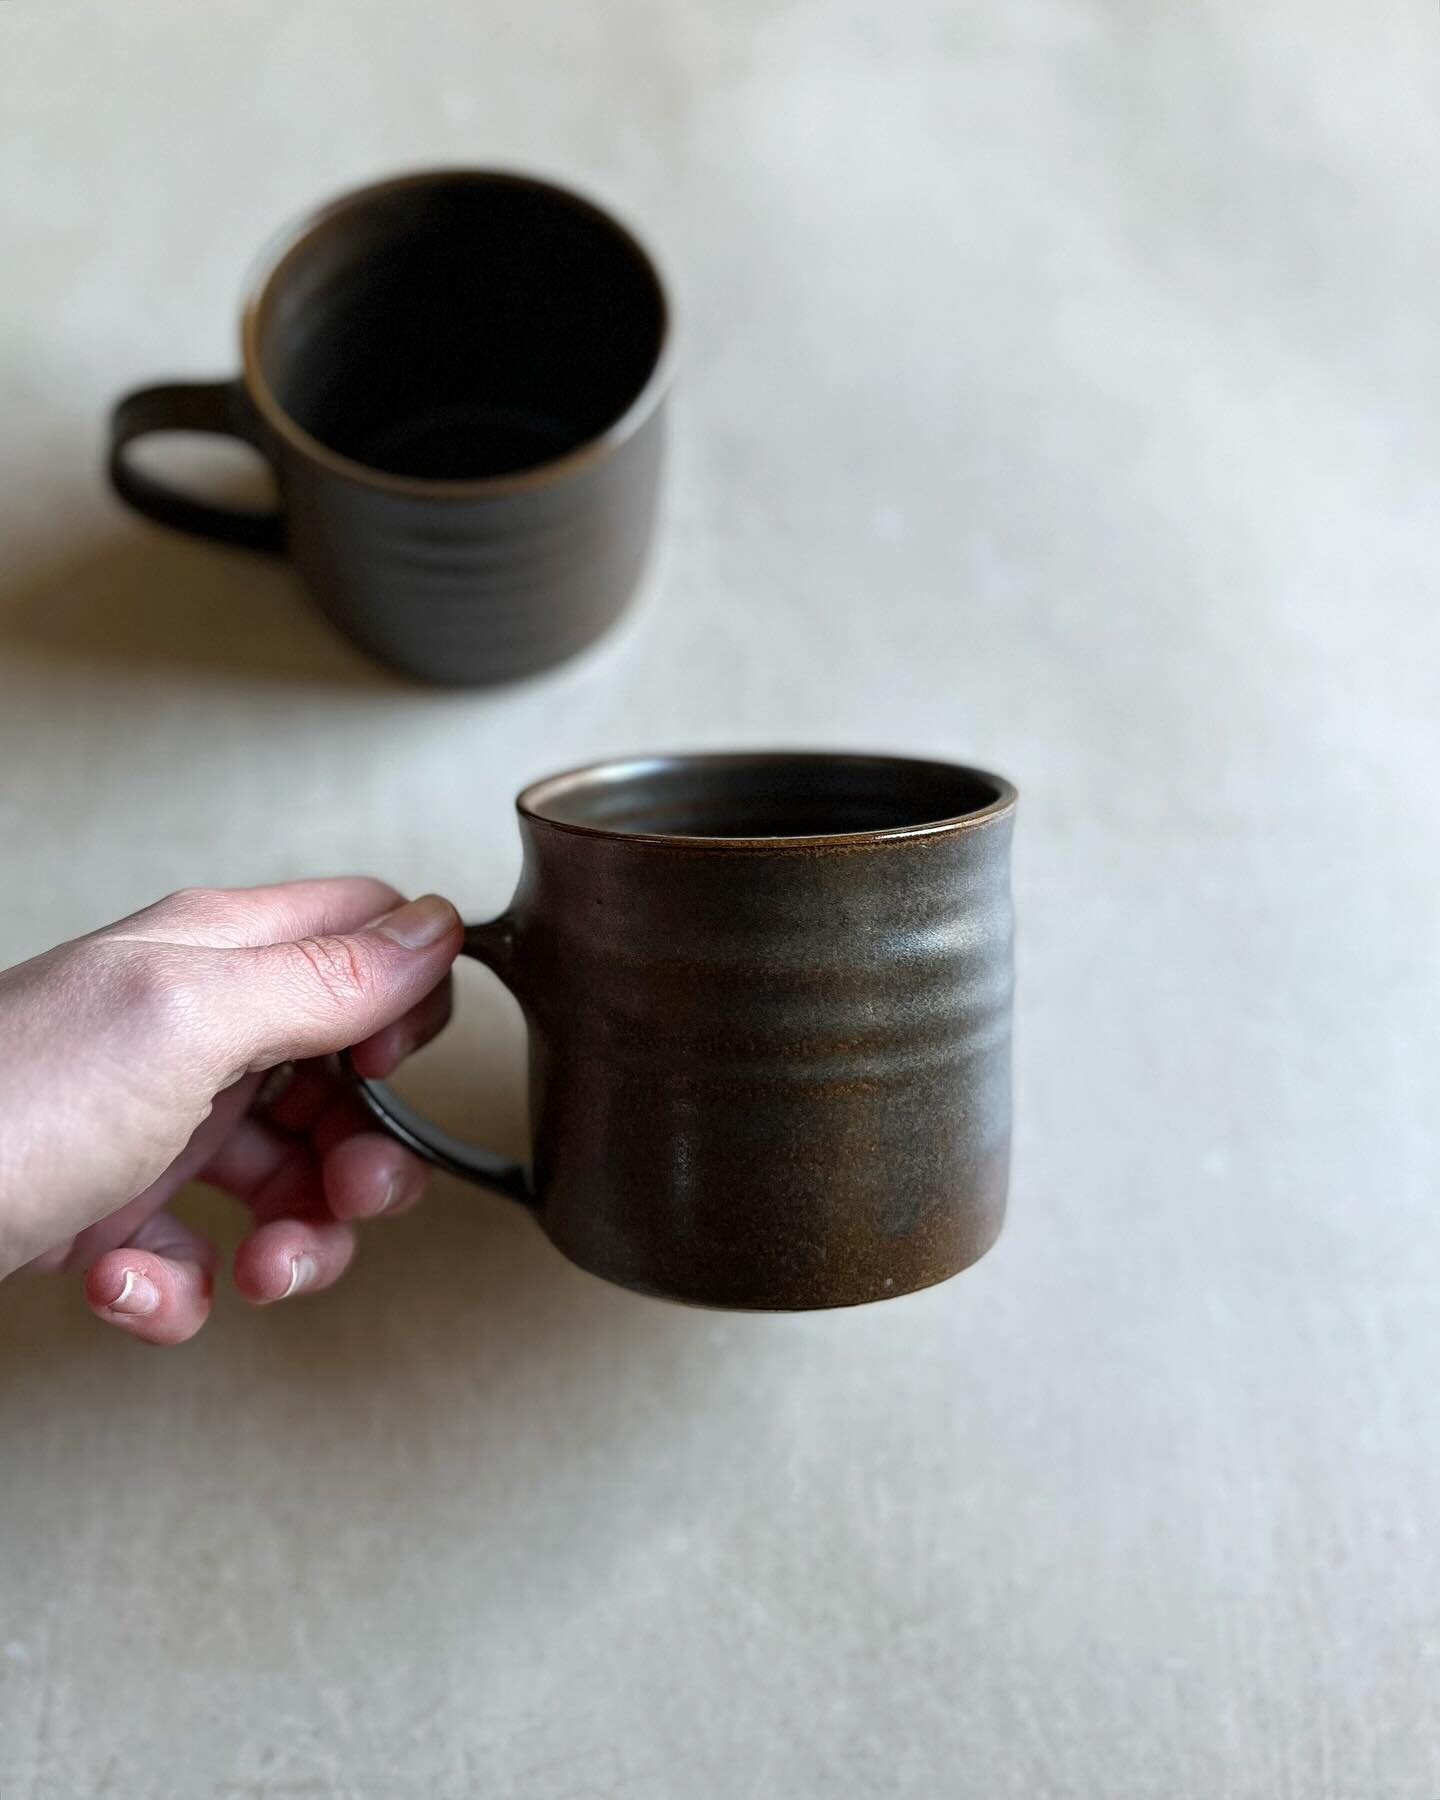 This brown glaze can do some magical things, often varying in texture and colour. Makes for an exciting kiln opening each time a batch of pots are coated in a deep rich red, closing the lid with a vague but never precise anticipation of what the surf